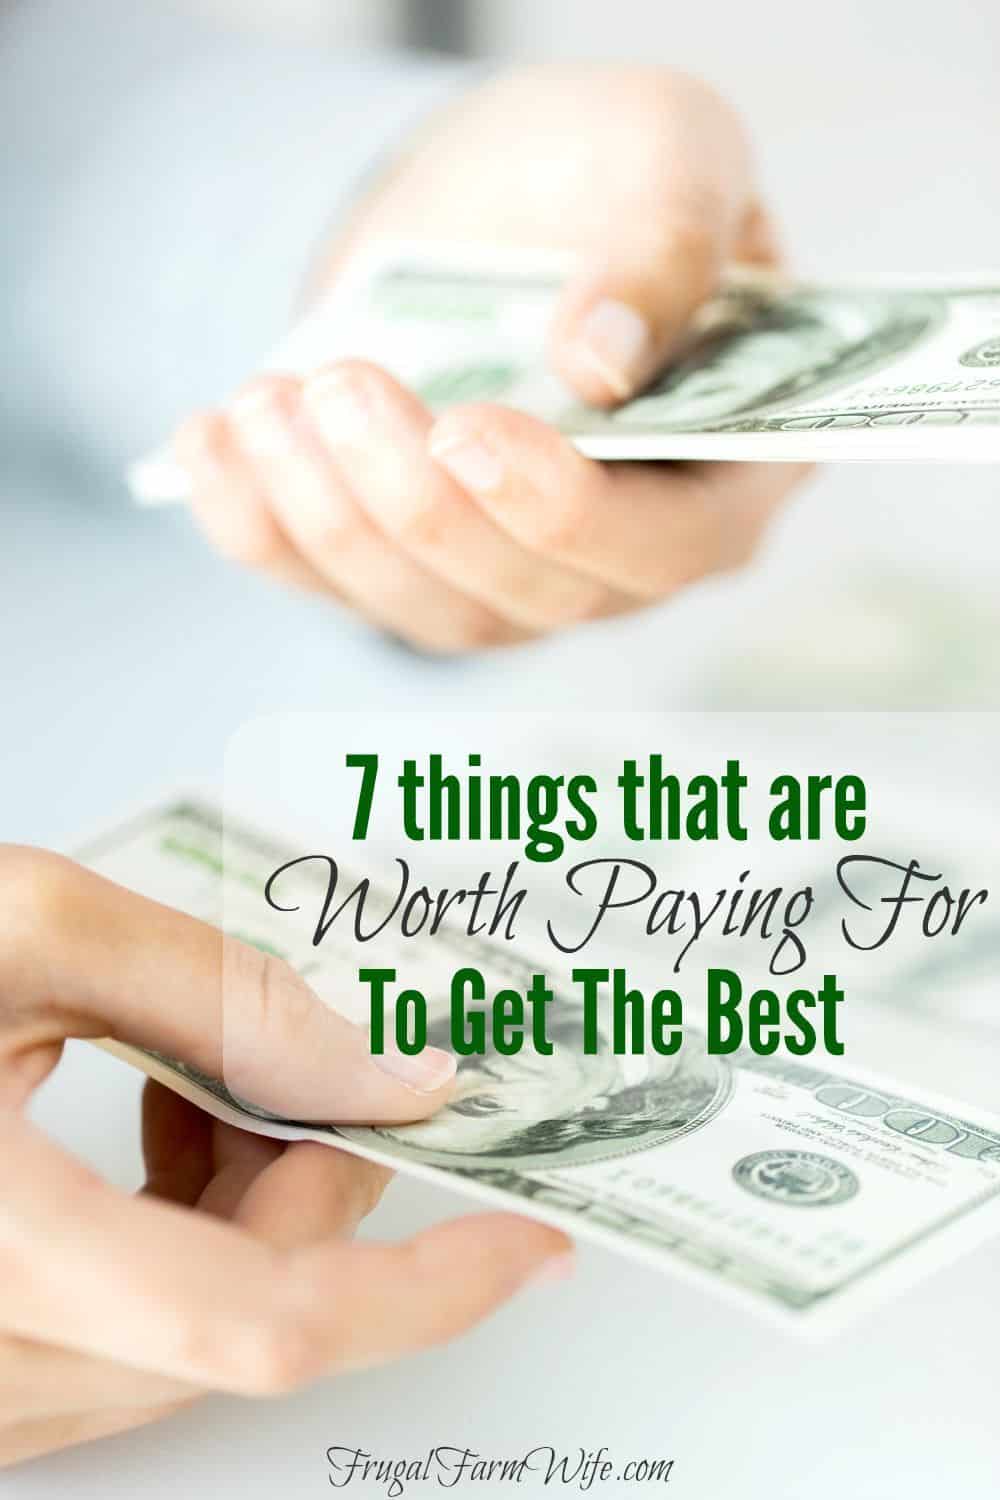 Seven things are worth paying for to get the best. Do you agree with these?